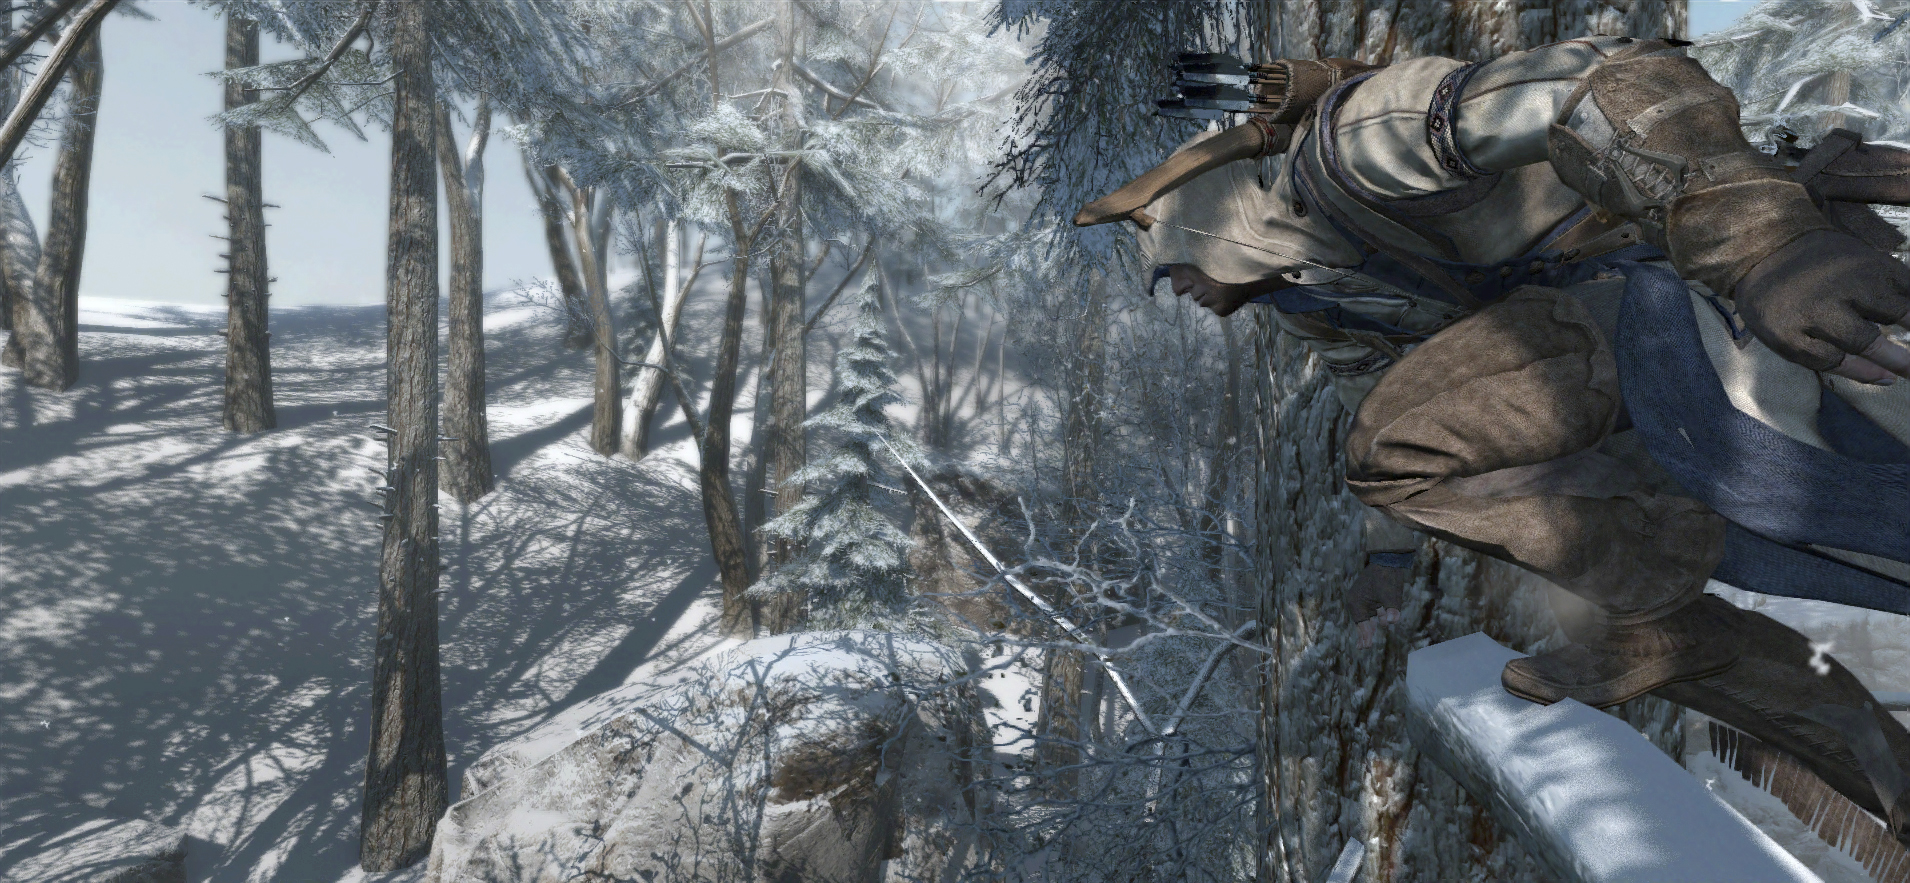 Media asset in full size related to 3dfxzone.it news item entitled as follows: Assassin's Creed III Screenshots: Connor corre nei boschi innevati | Image Name: news17020_5.jpg